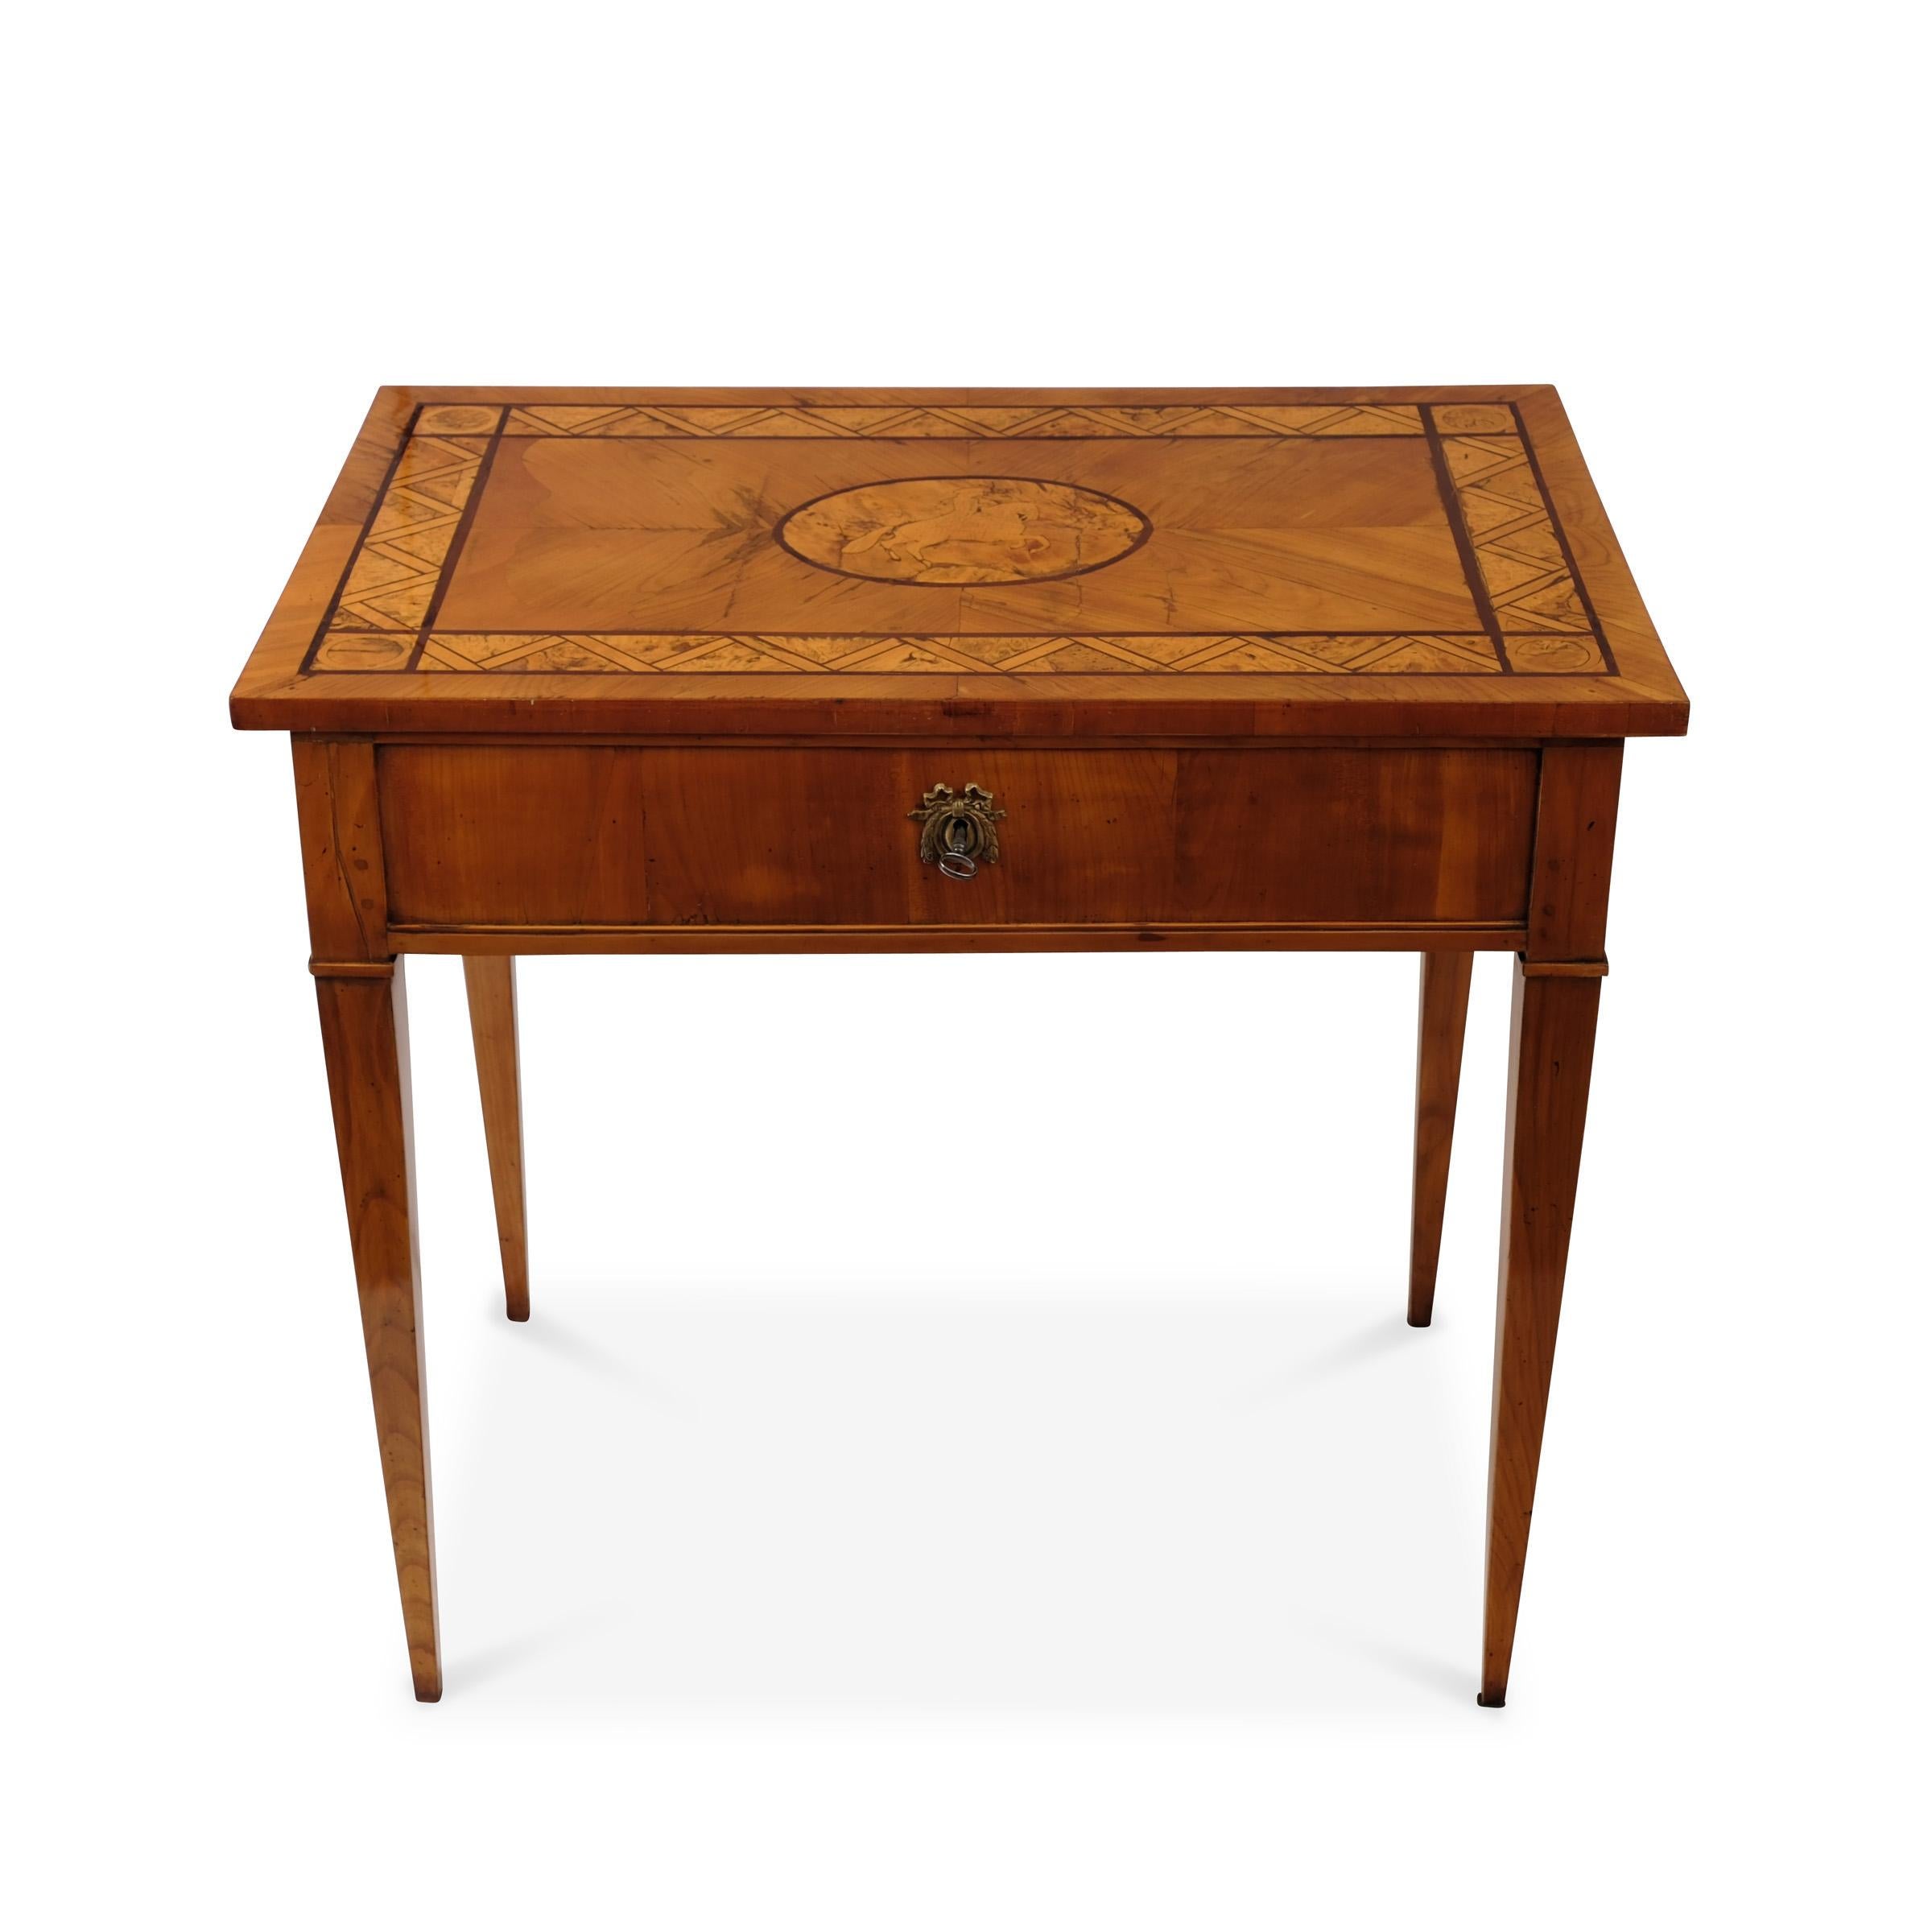 Mirror early 19th Century Empire Vanity Side Table Cherrywood For Sale